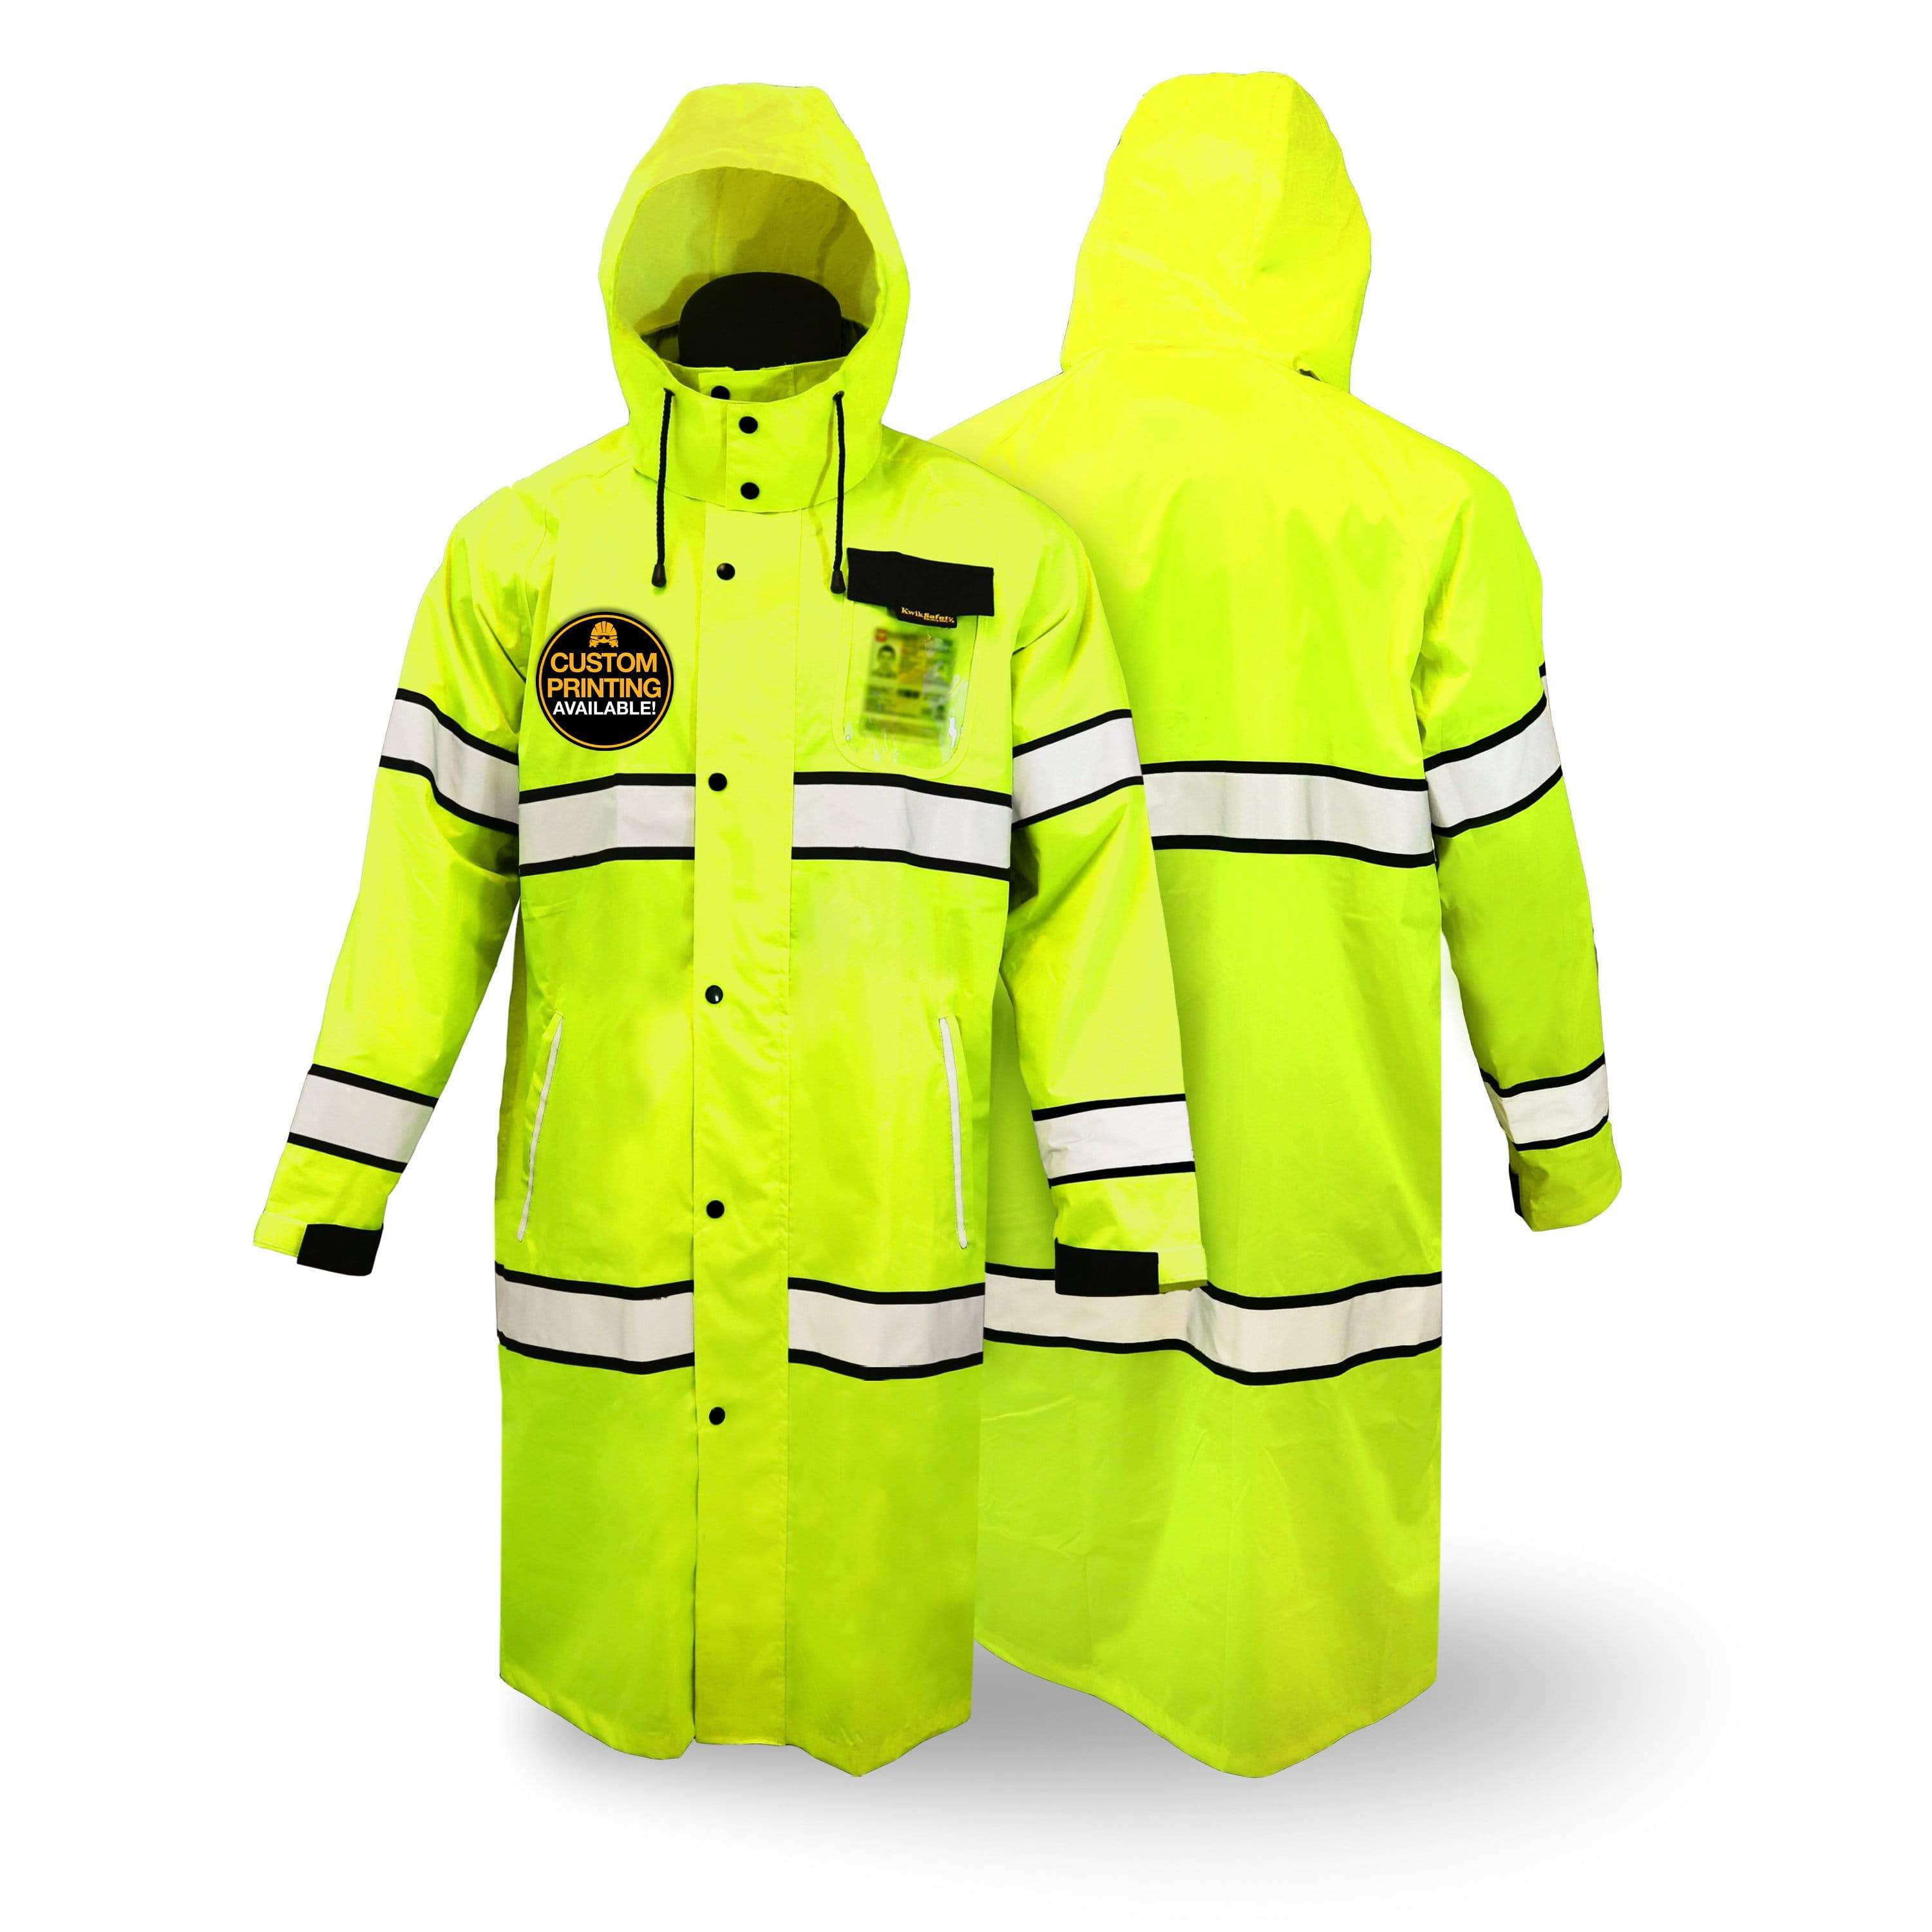 KwikSafety TORRENT High Visibility Rain Gear (FOLDABLE HOOD) Class 3, Type  R ANSI Tested OSHA Compliant Hi Vis Trench Coat Reflective PPE - Model No.